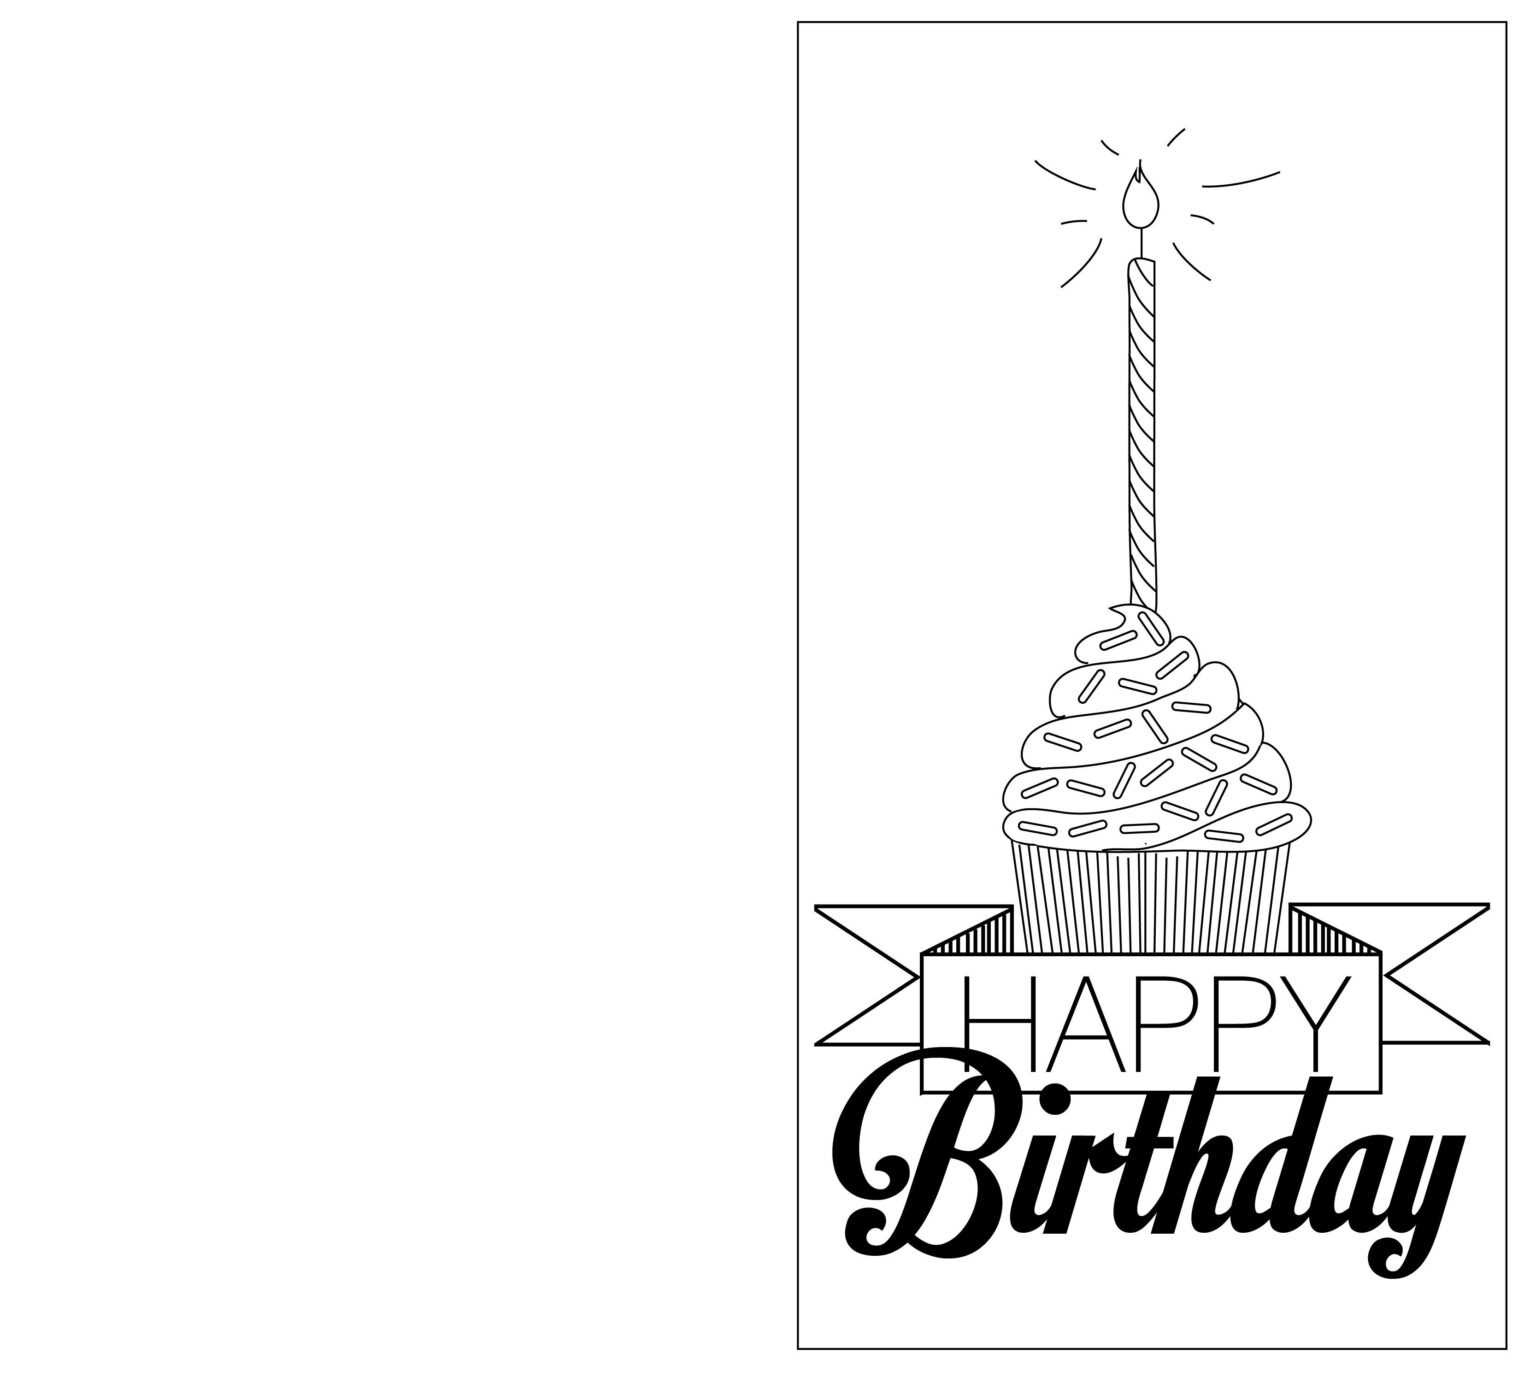 032-printable-birthday-card-template-black-and-white-sample-throughout